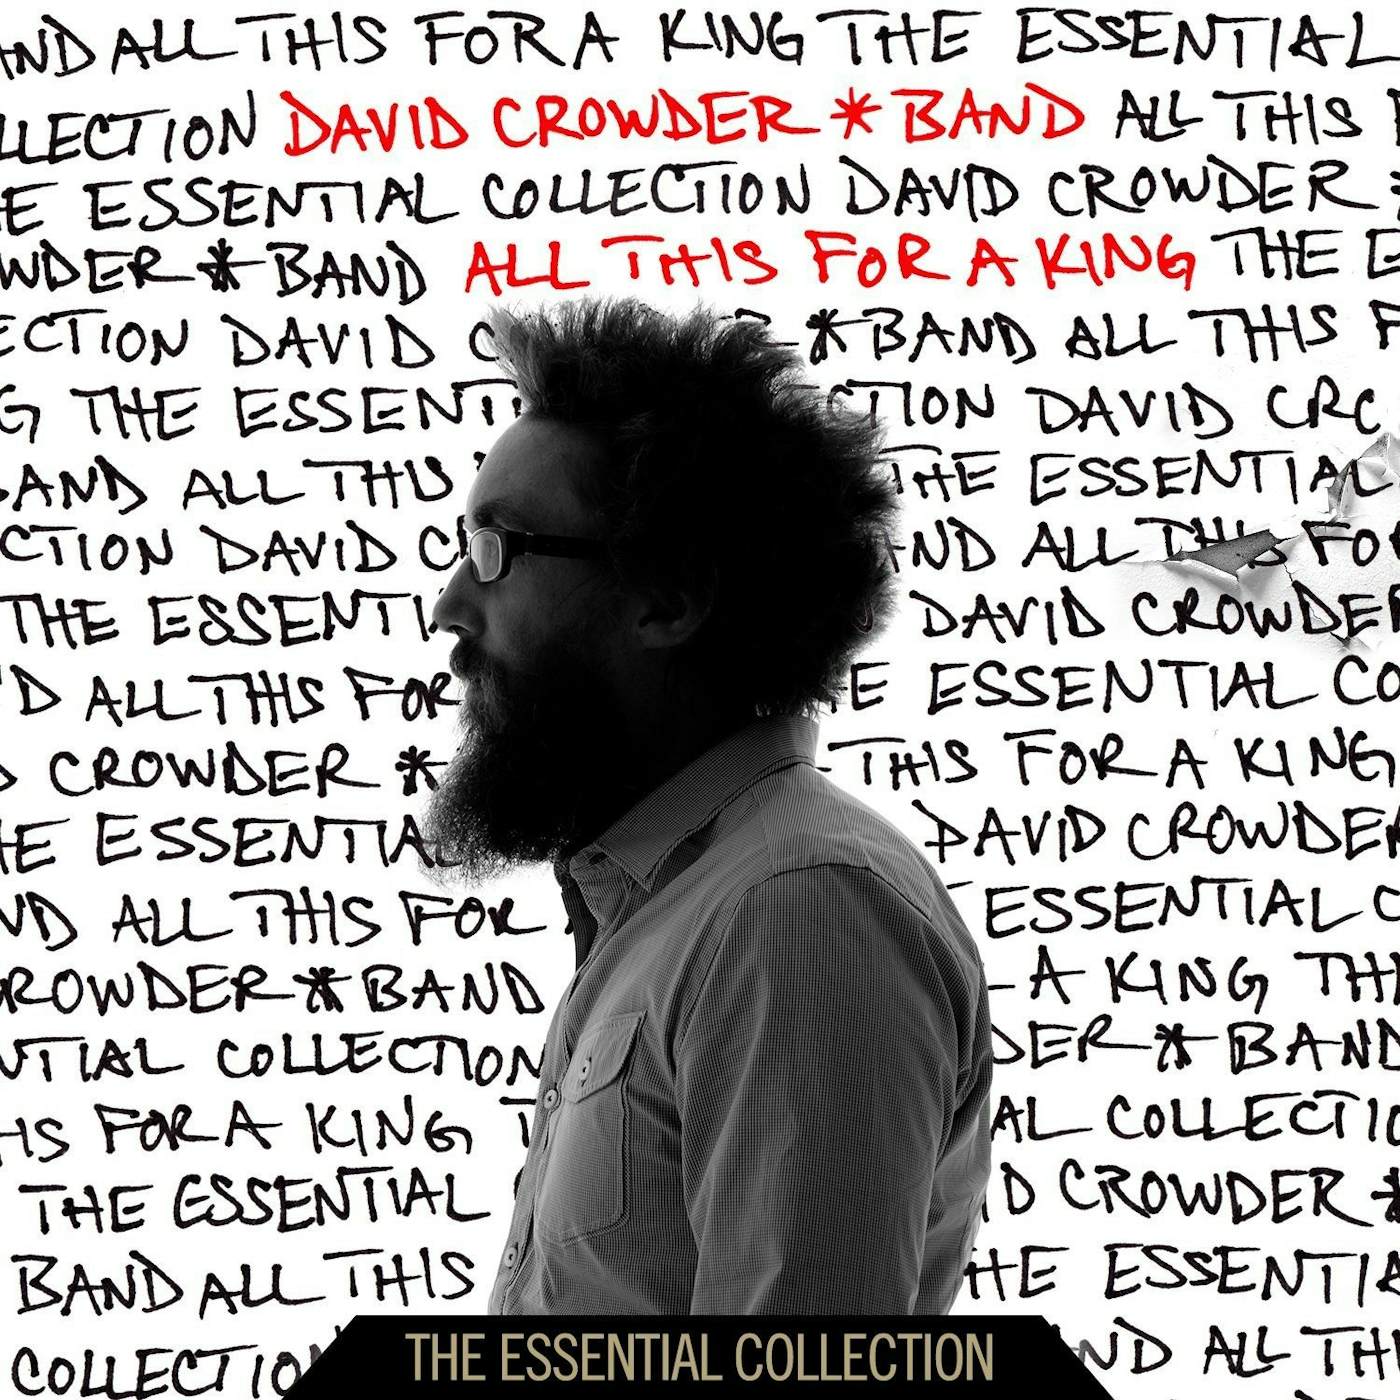 David Crowder Band 'All This For A King - The Essential Collection'